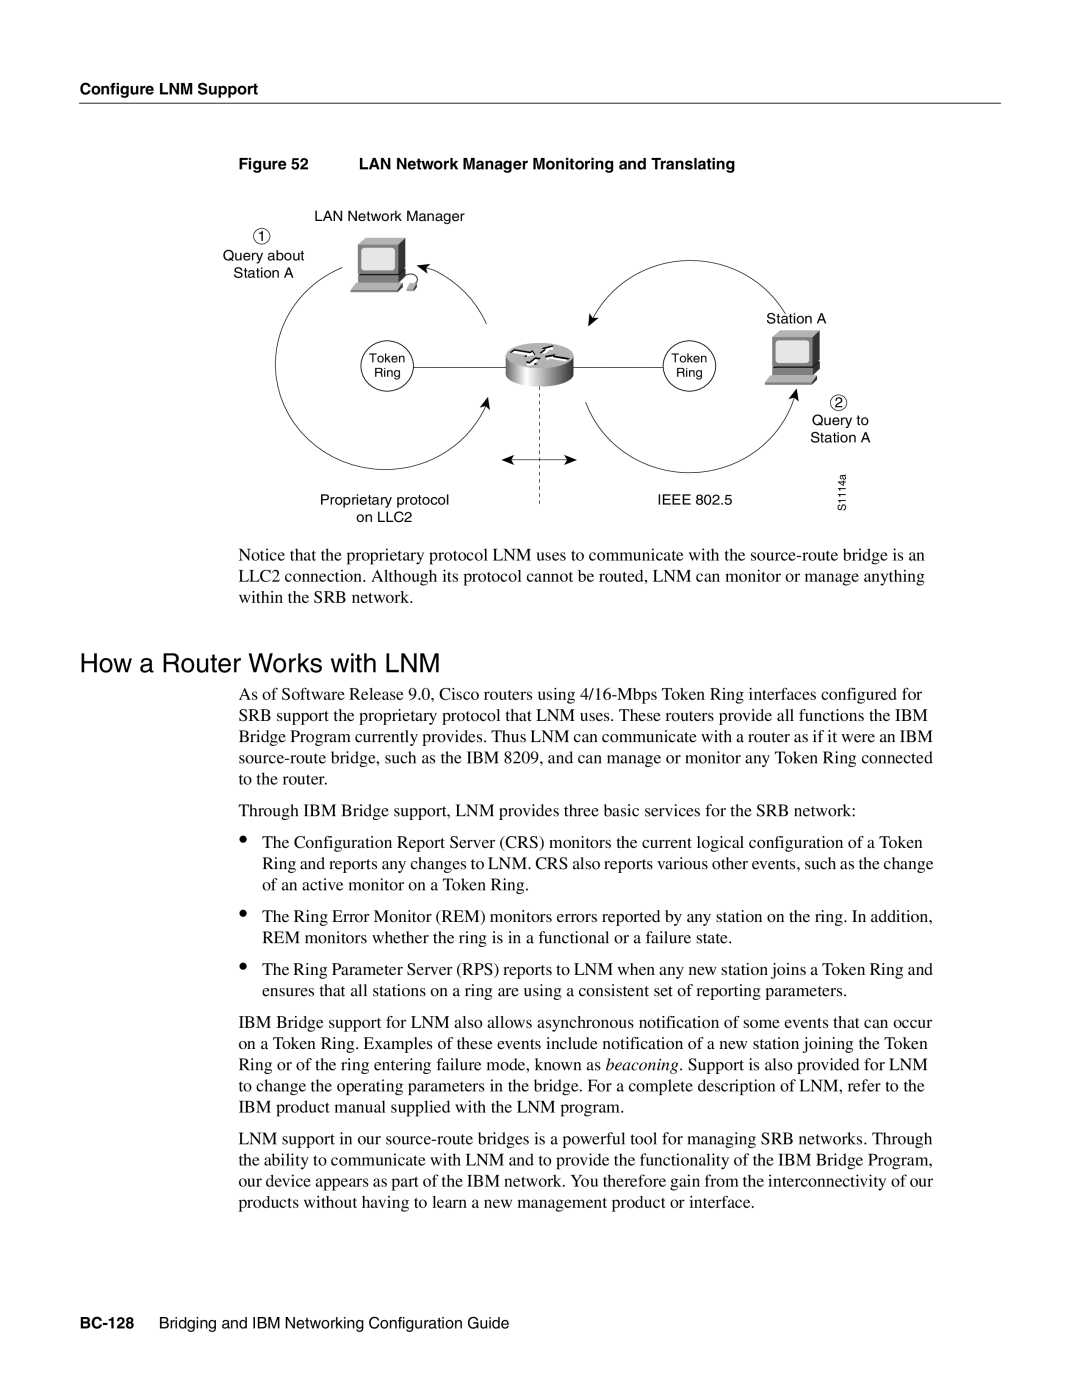 Cisco Systems BC-109 manual How a Router Works with LNM, BC-128 Bridging and IBM Networking Configuration Guide 